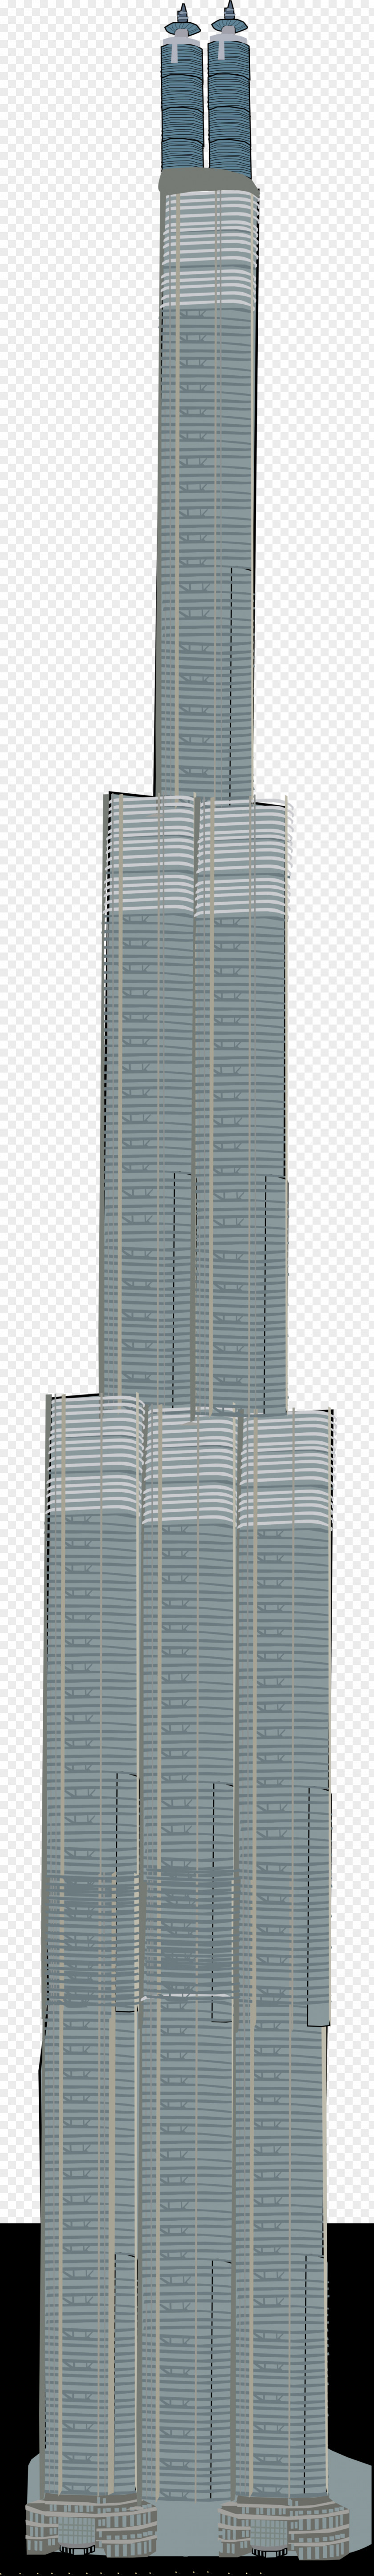 Building Facade High-rise Tower Product PNG